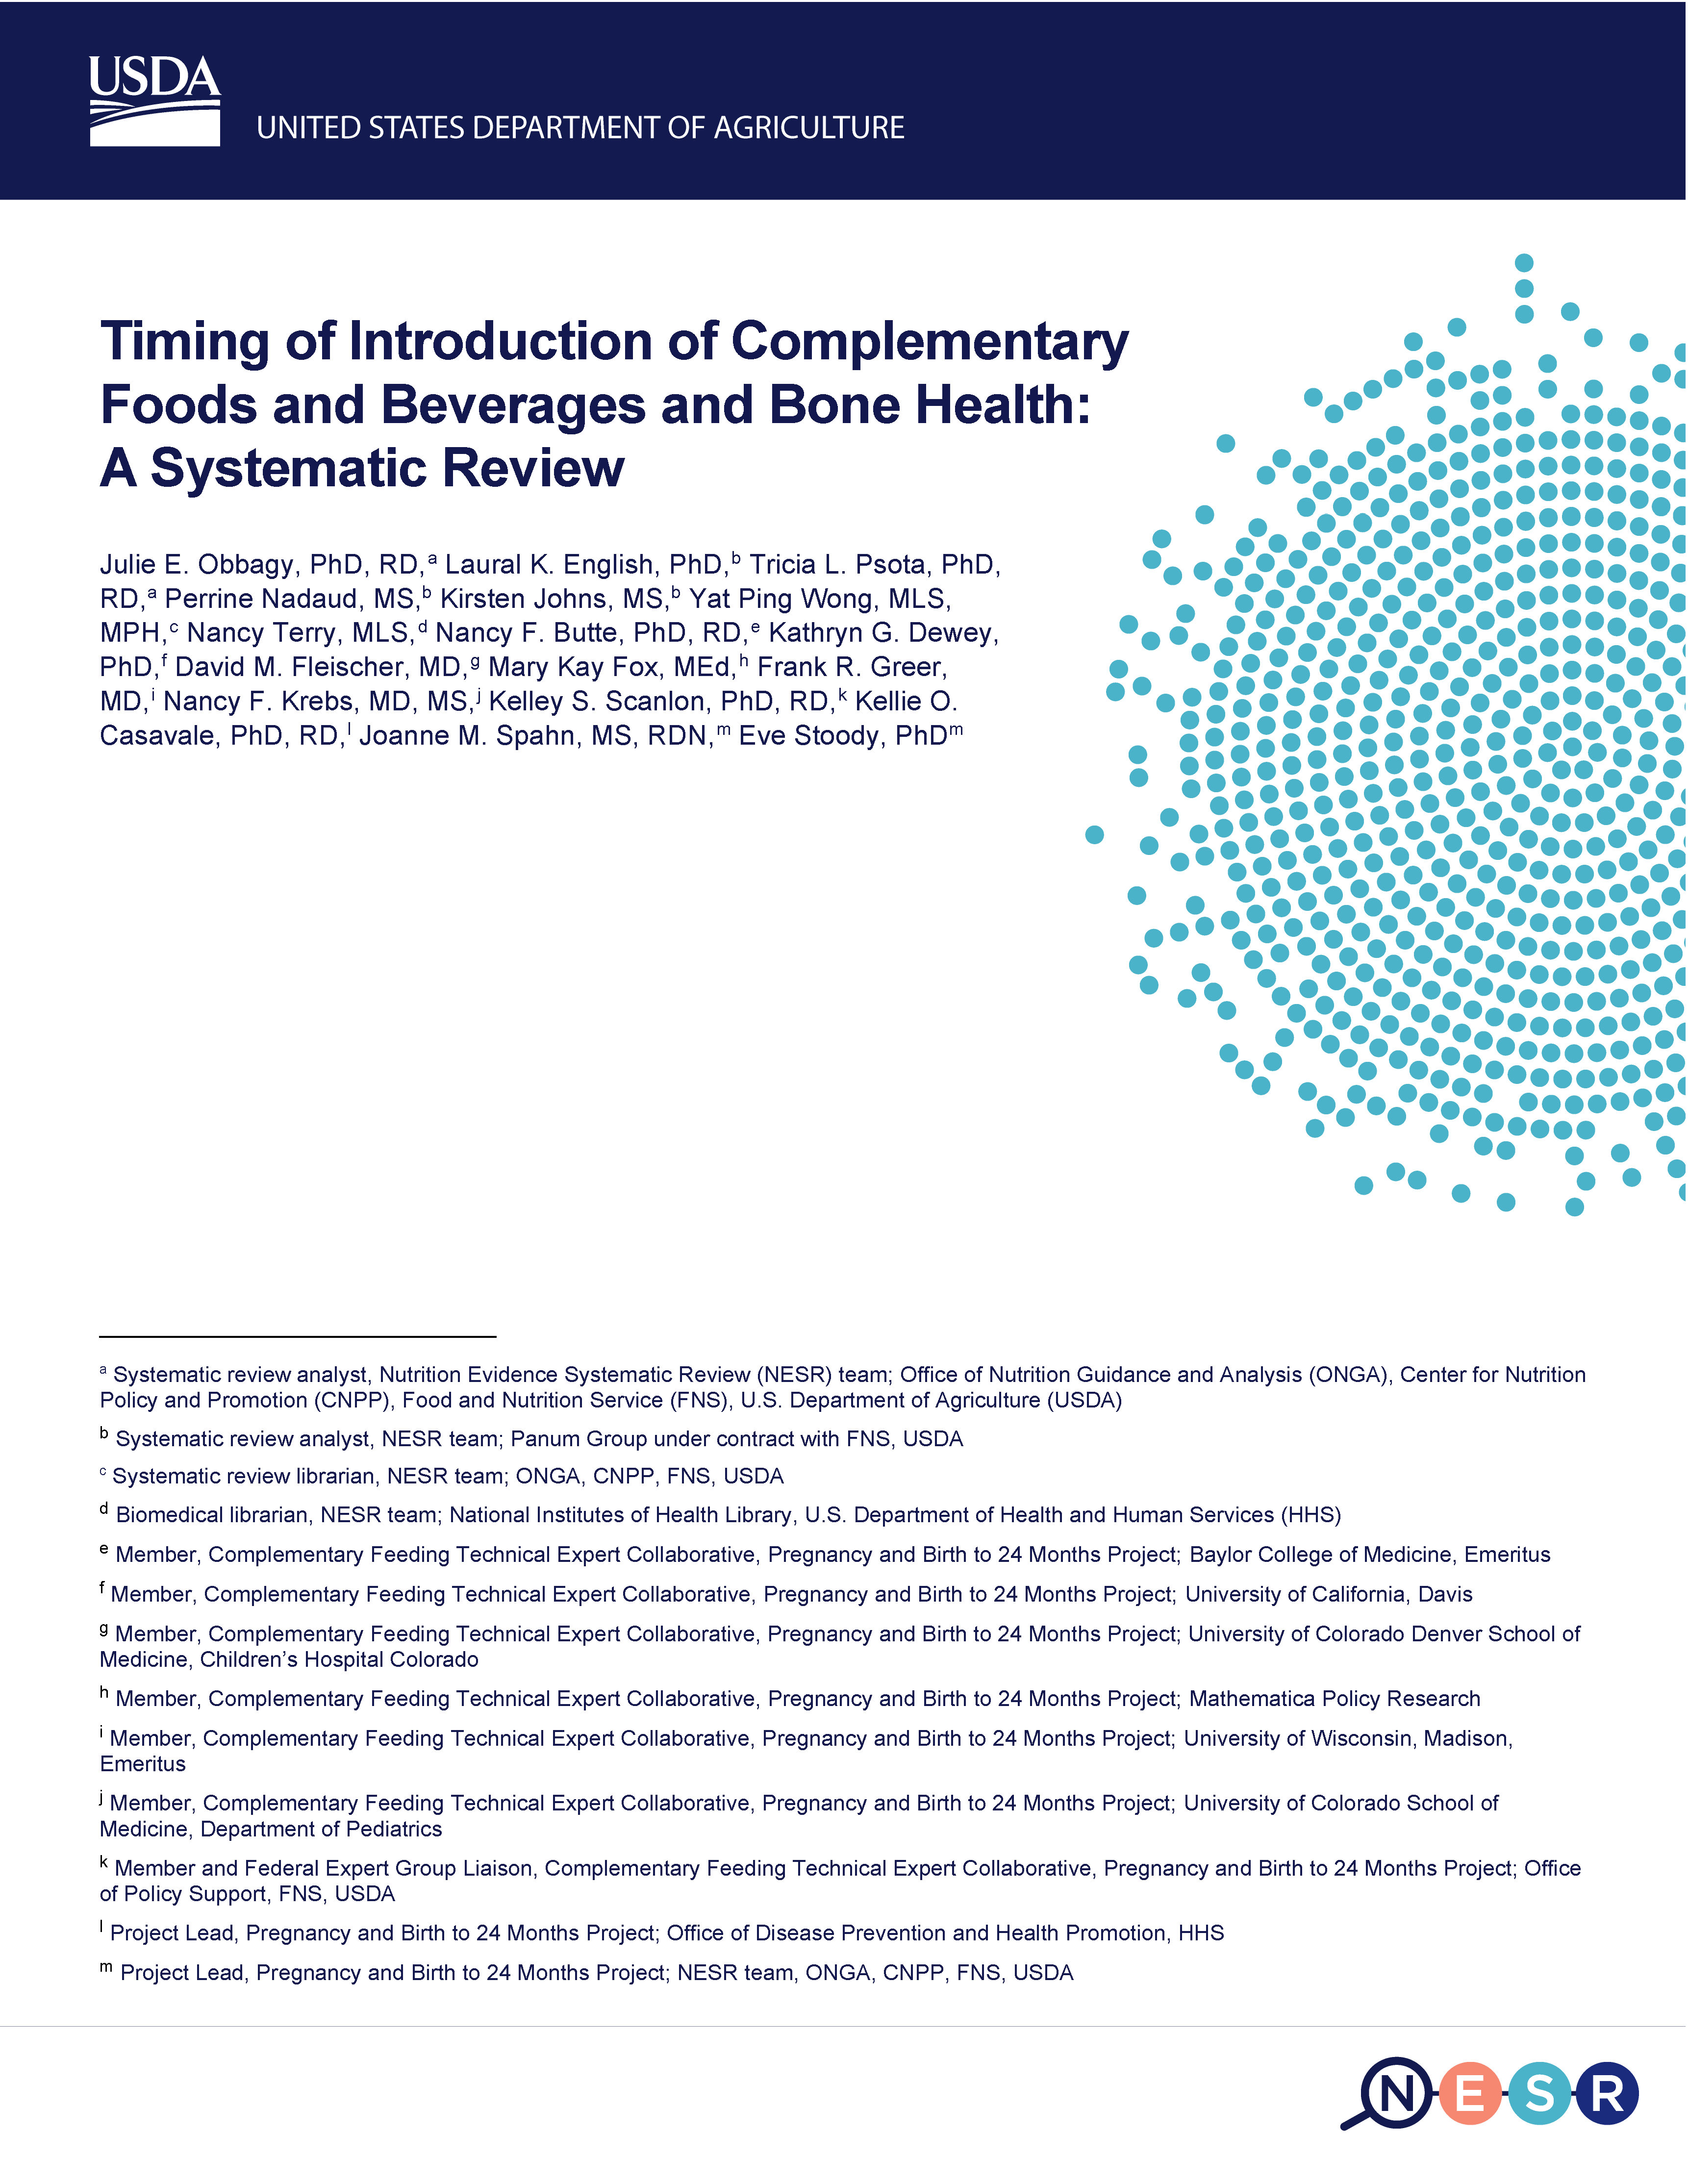 Cover of Timing of CFB and Bone Health Report